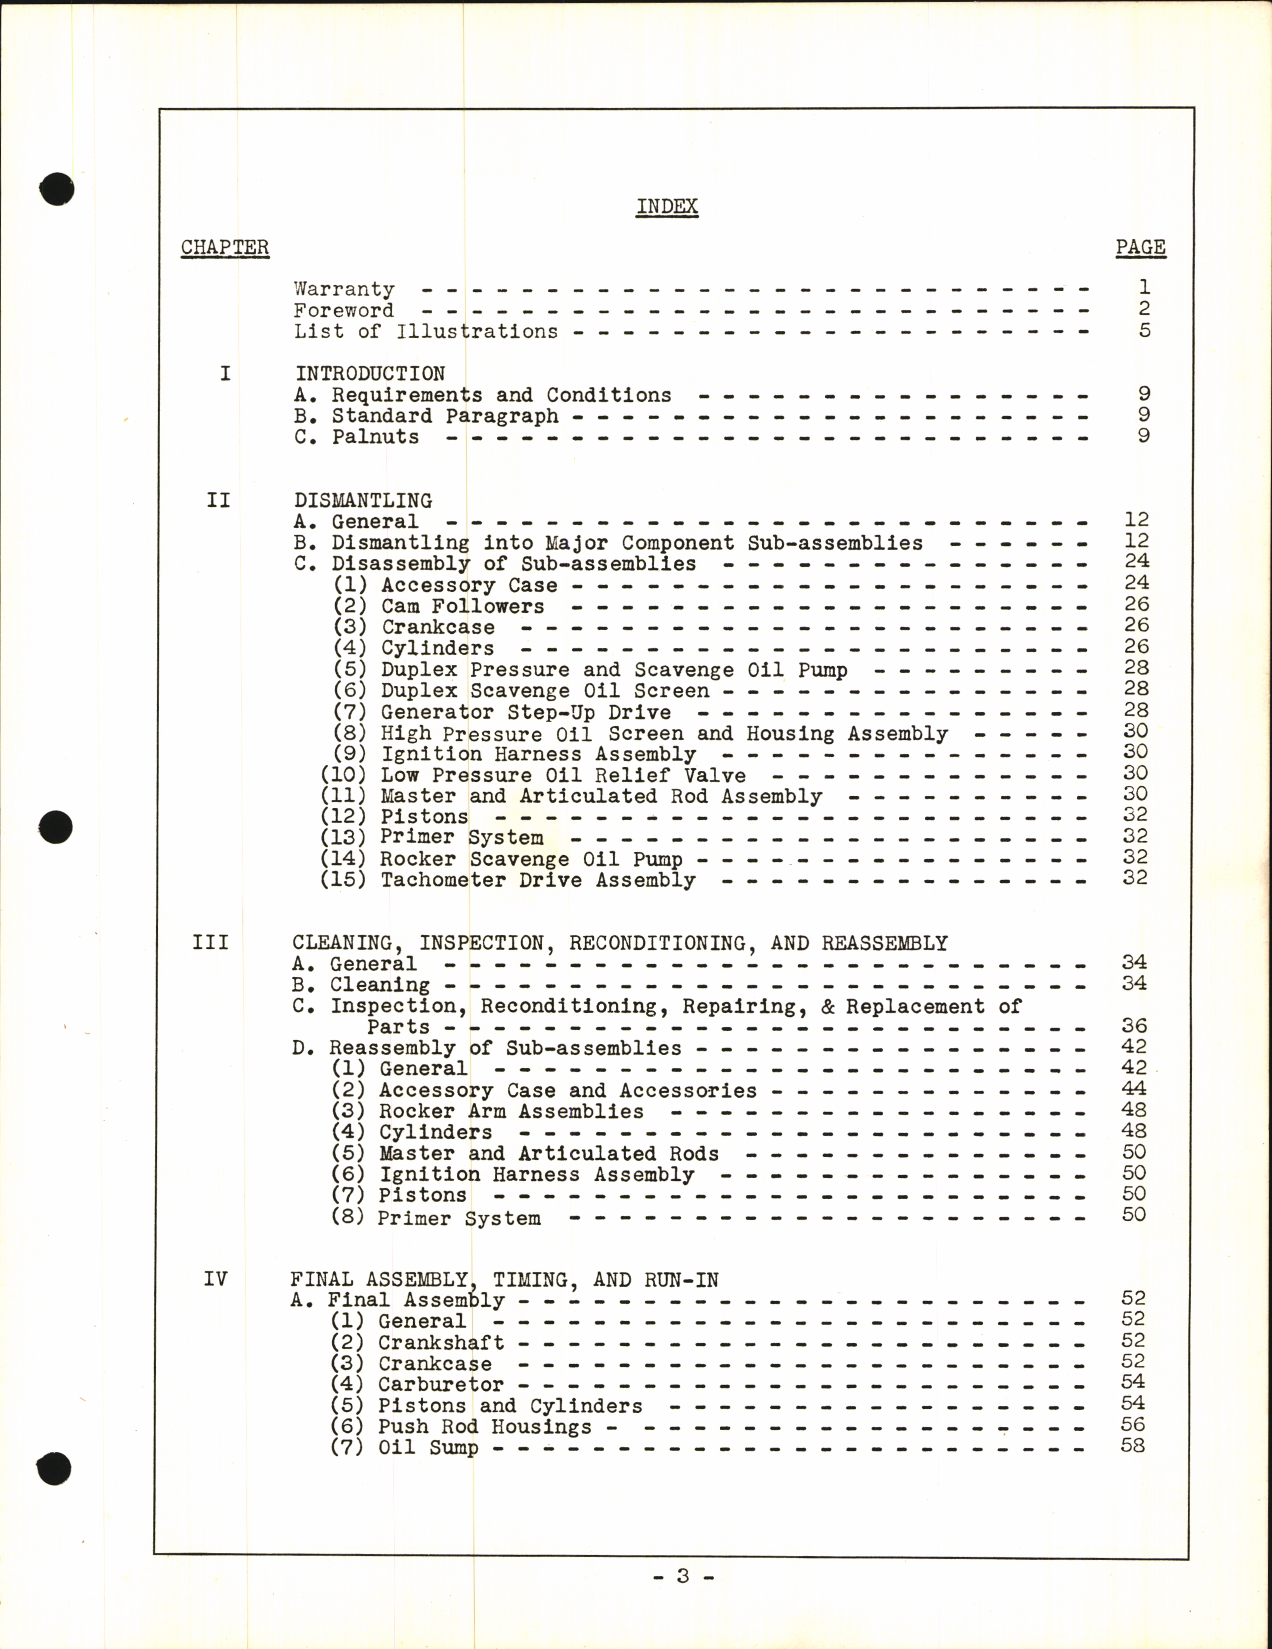 Sample page 5 from AirCorps Library document: Handbook of Overhaul Instructions for R670-4 Continental Aircraft Engines